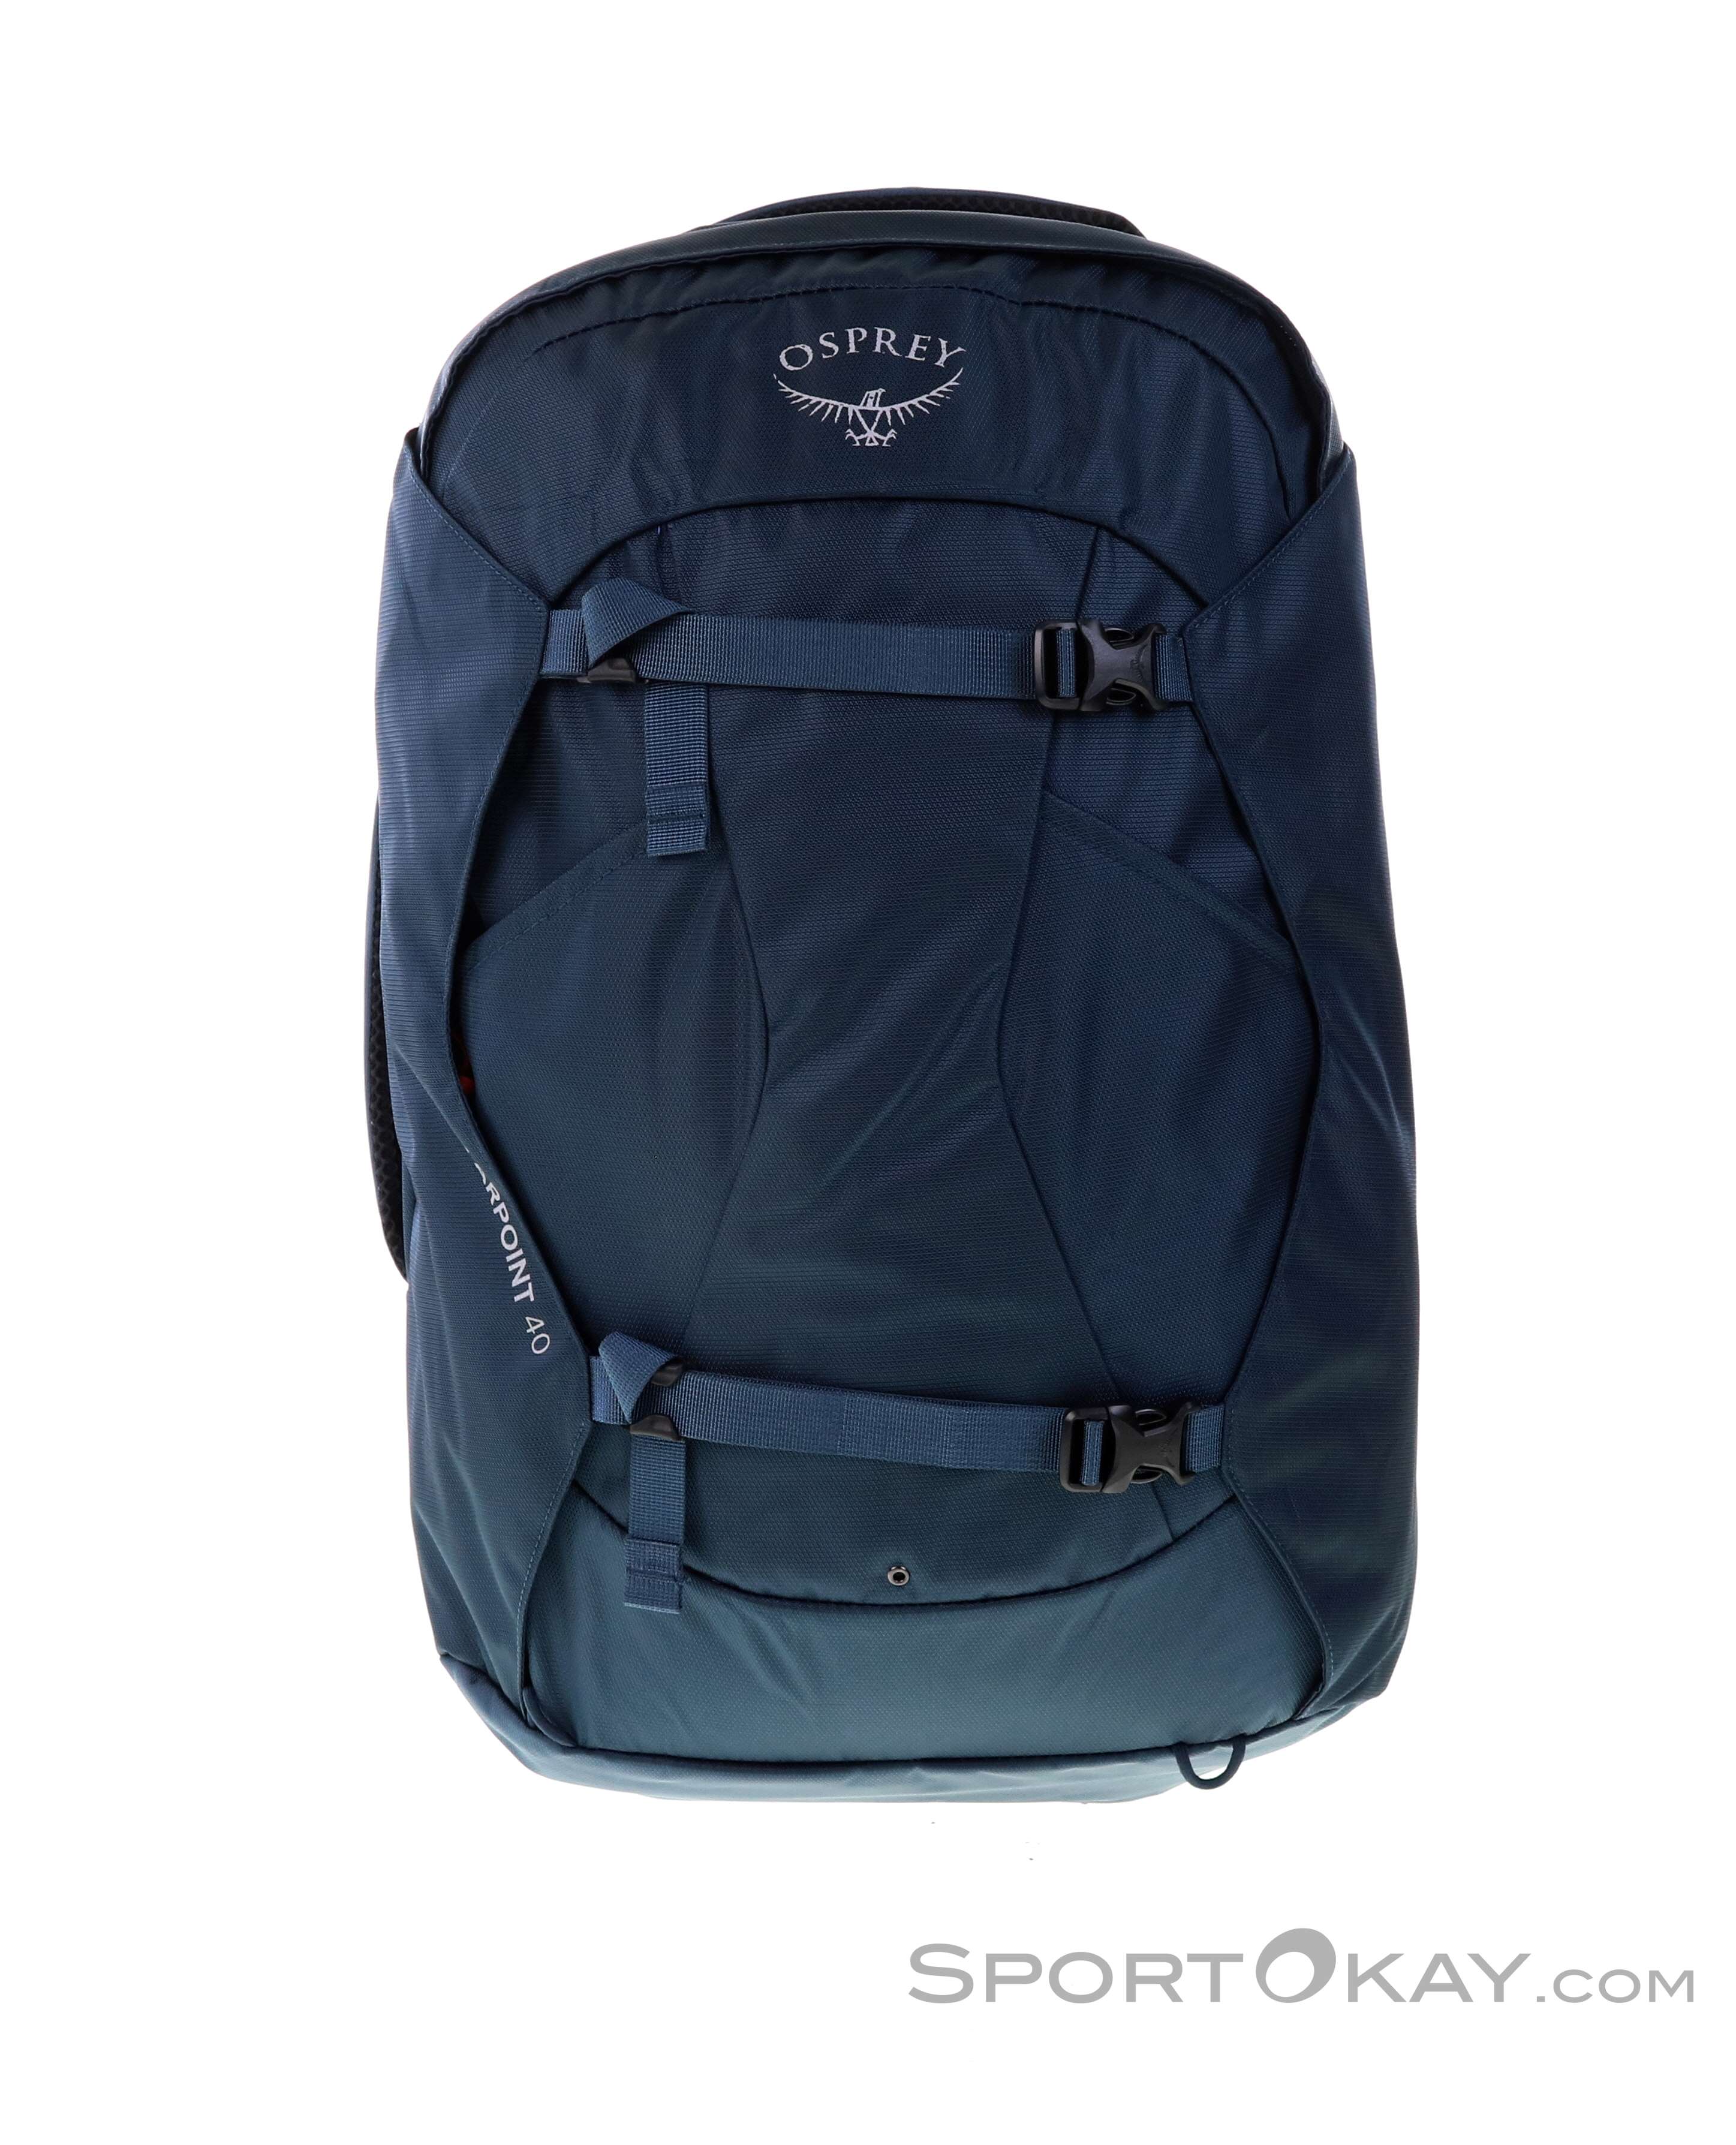 Osprey Farpoint 40l Backpack - Backpacks - Backpacks & Headlamps - Outdoor  - All